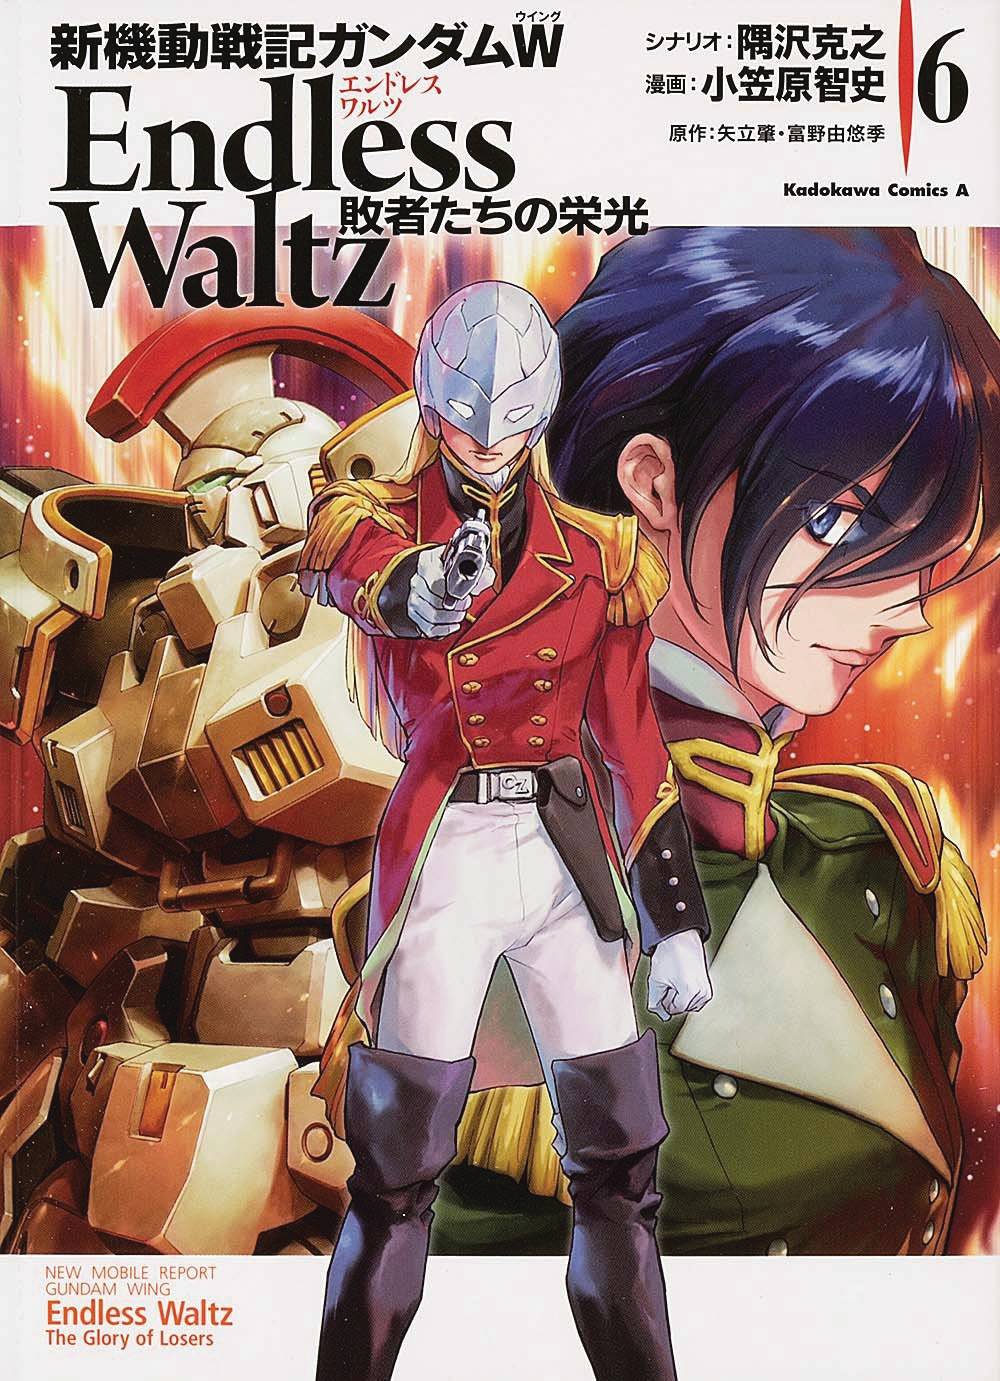 Mobile Suit Gundam Wing Manga Volume 6 Glory of the Losers